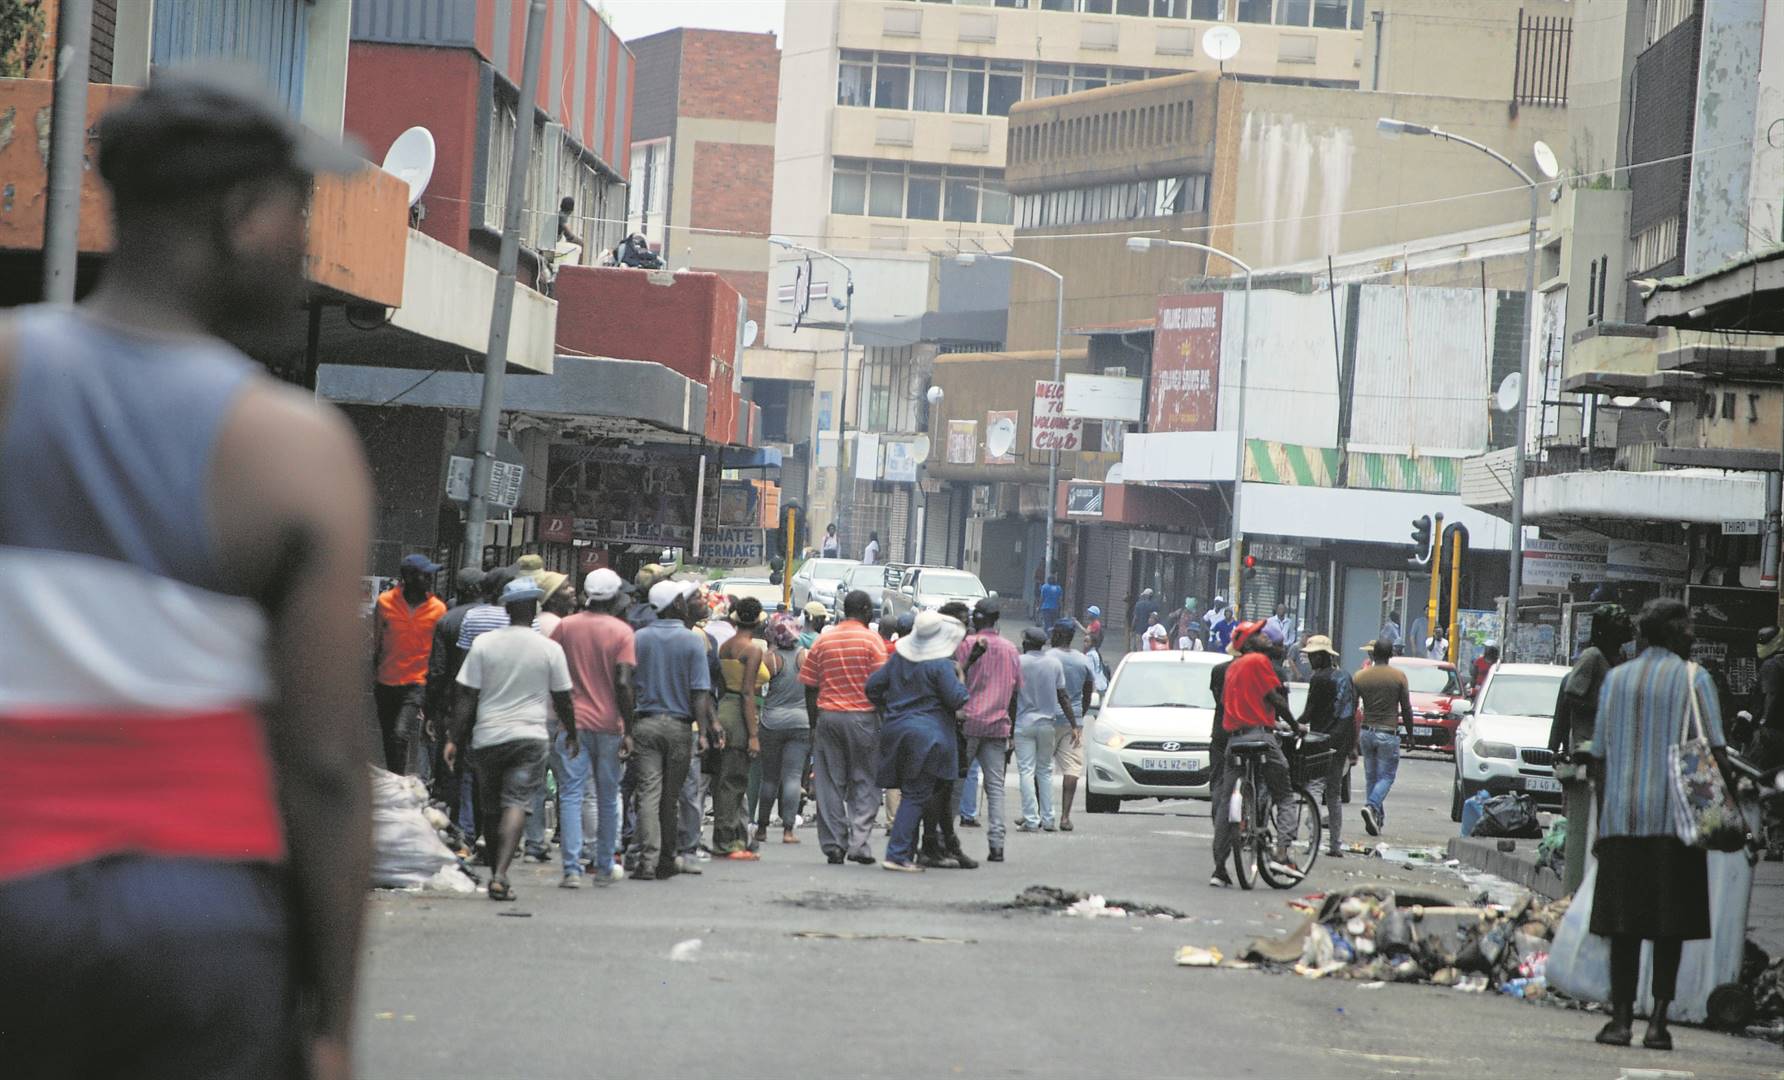 Taxi drivers and concerned residents walk in the Springs CBD looking for drugs.     Photo by Ntebatse Masipa